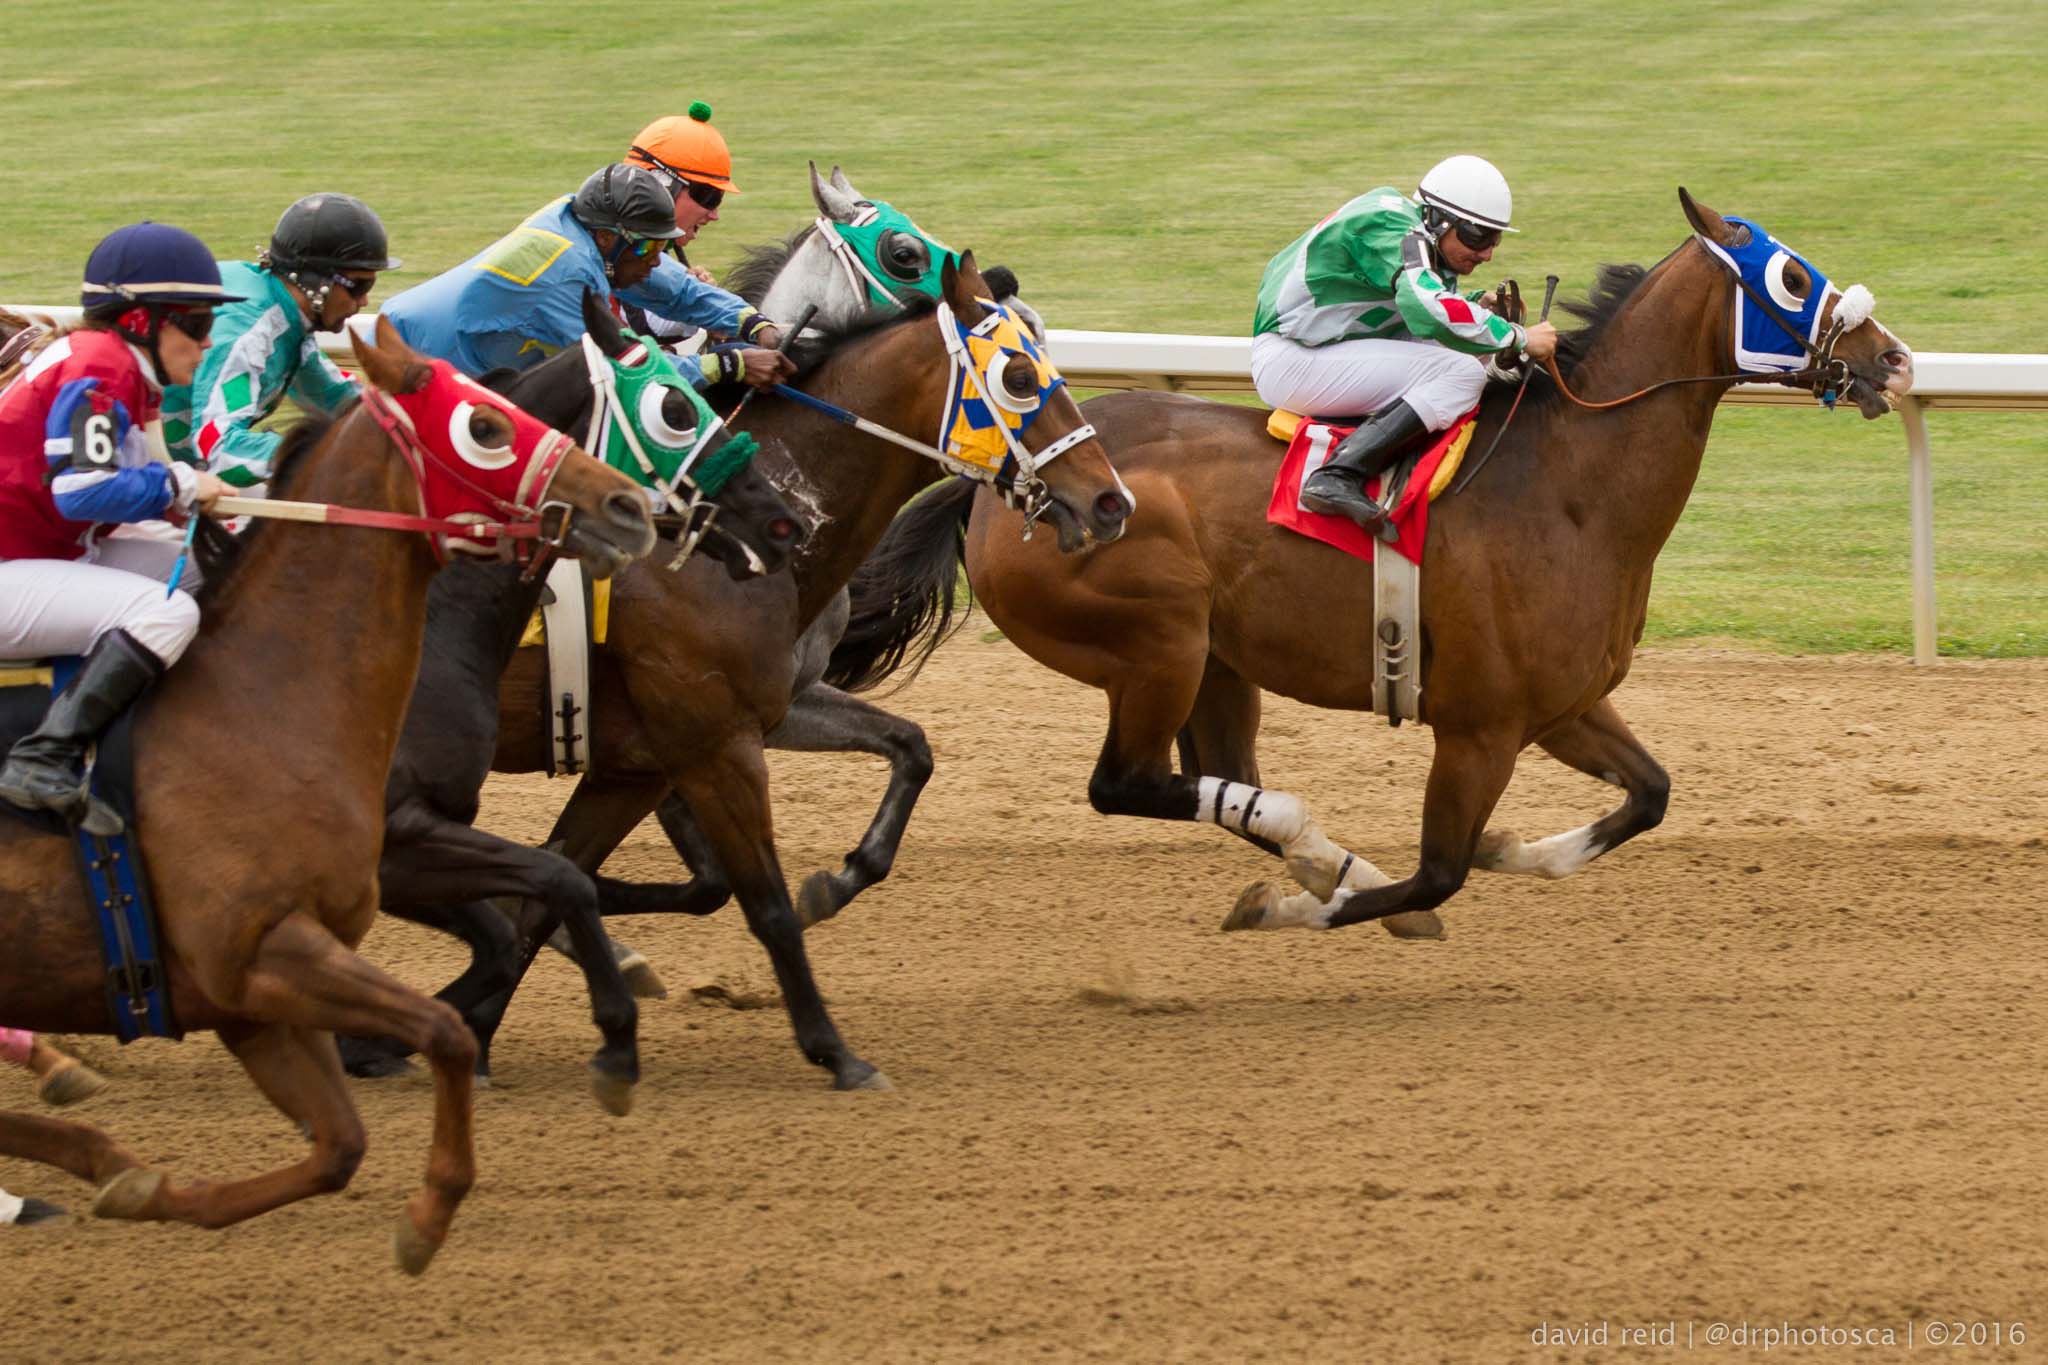 Tips for taking horse racing photos